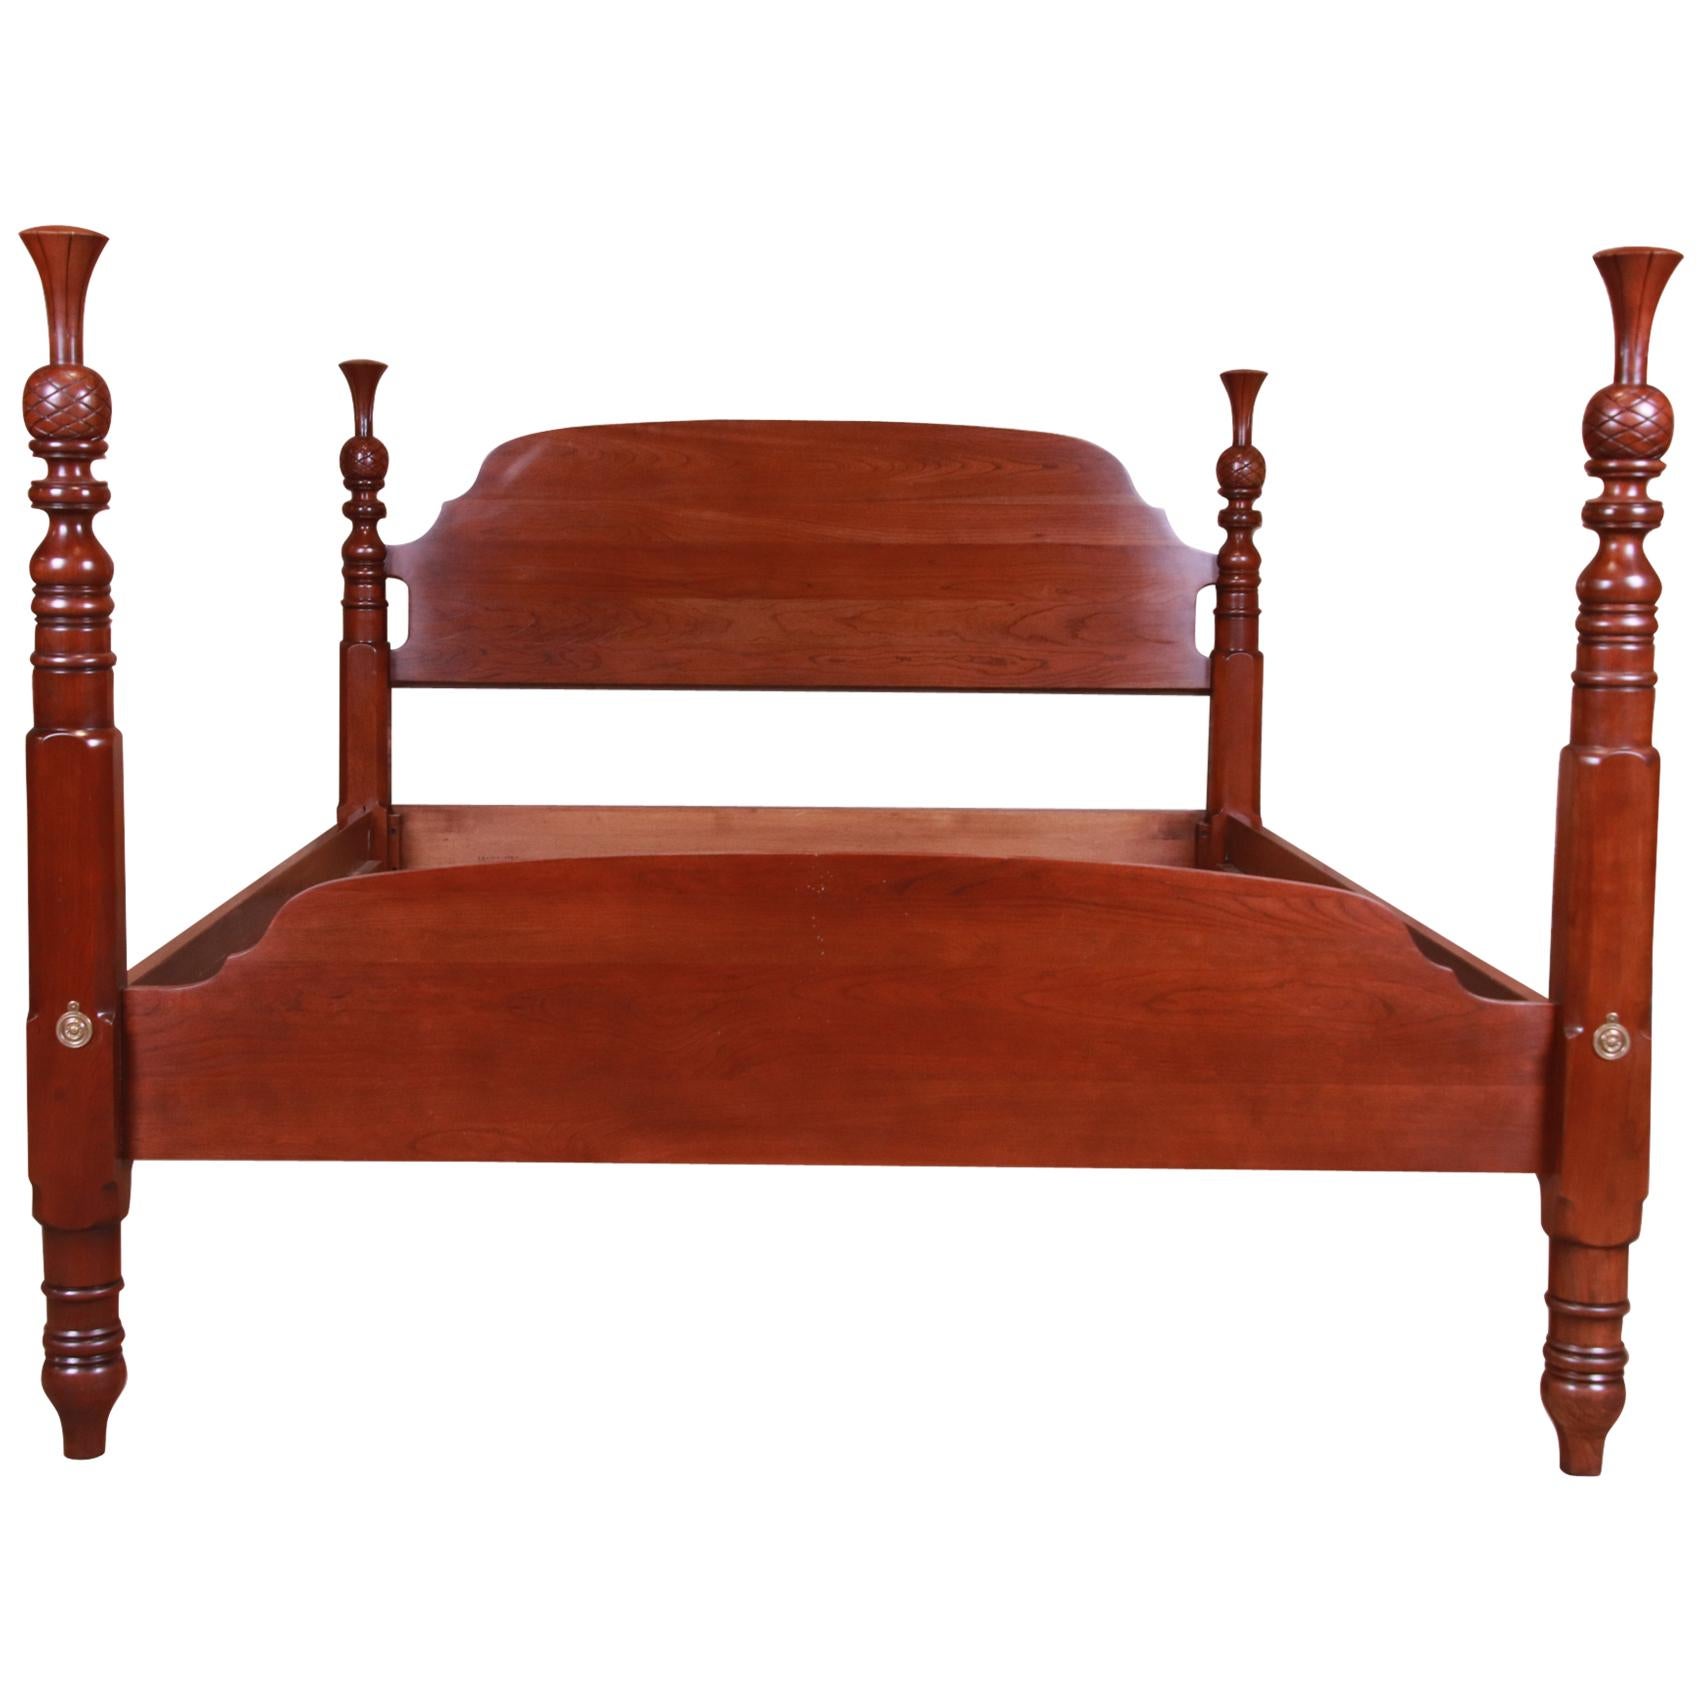 Harden American Colonial Solid Cherrywood Four Poster Queen Size Bed